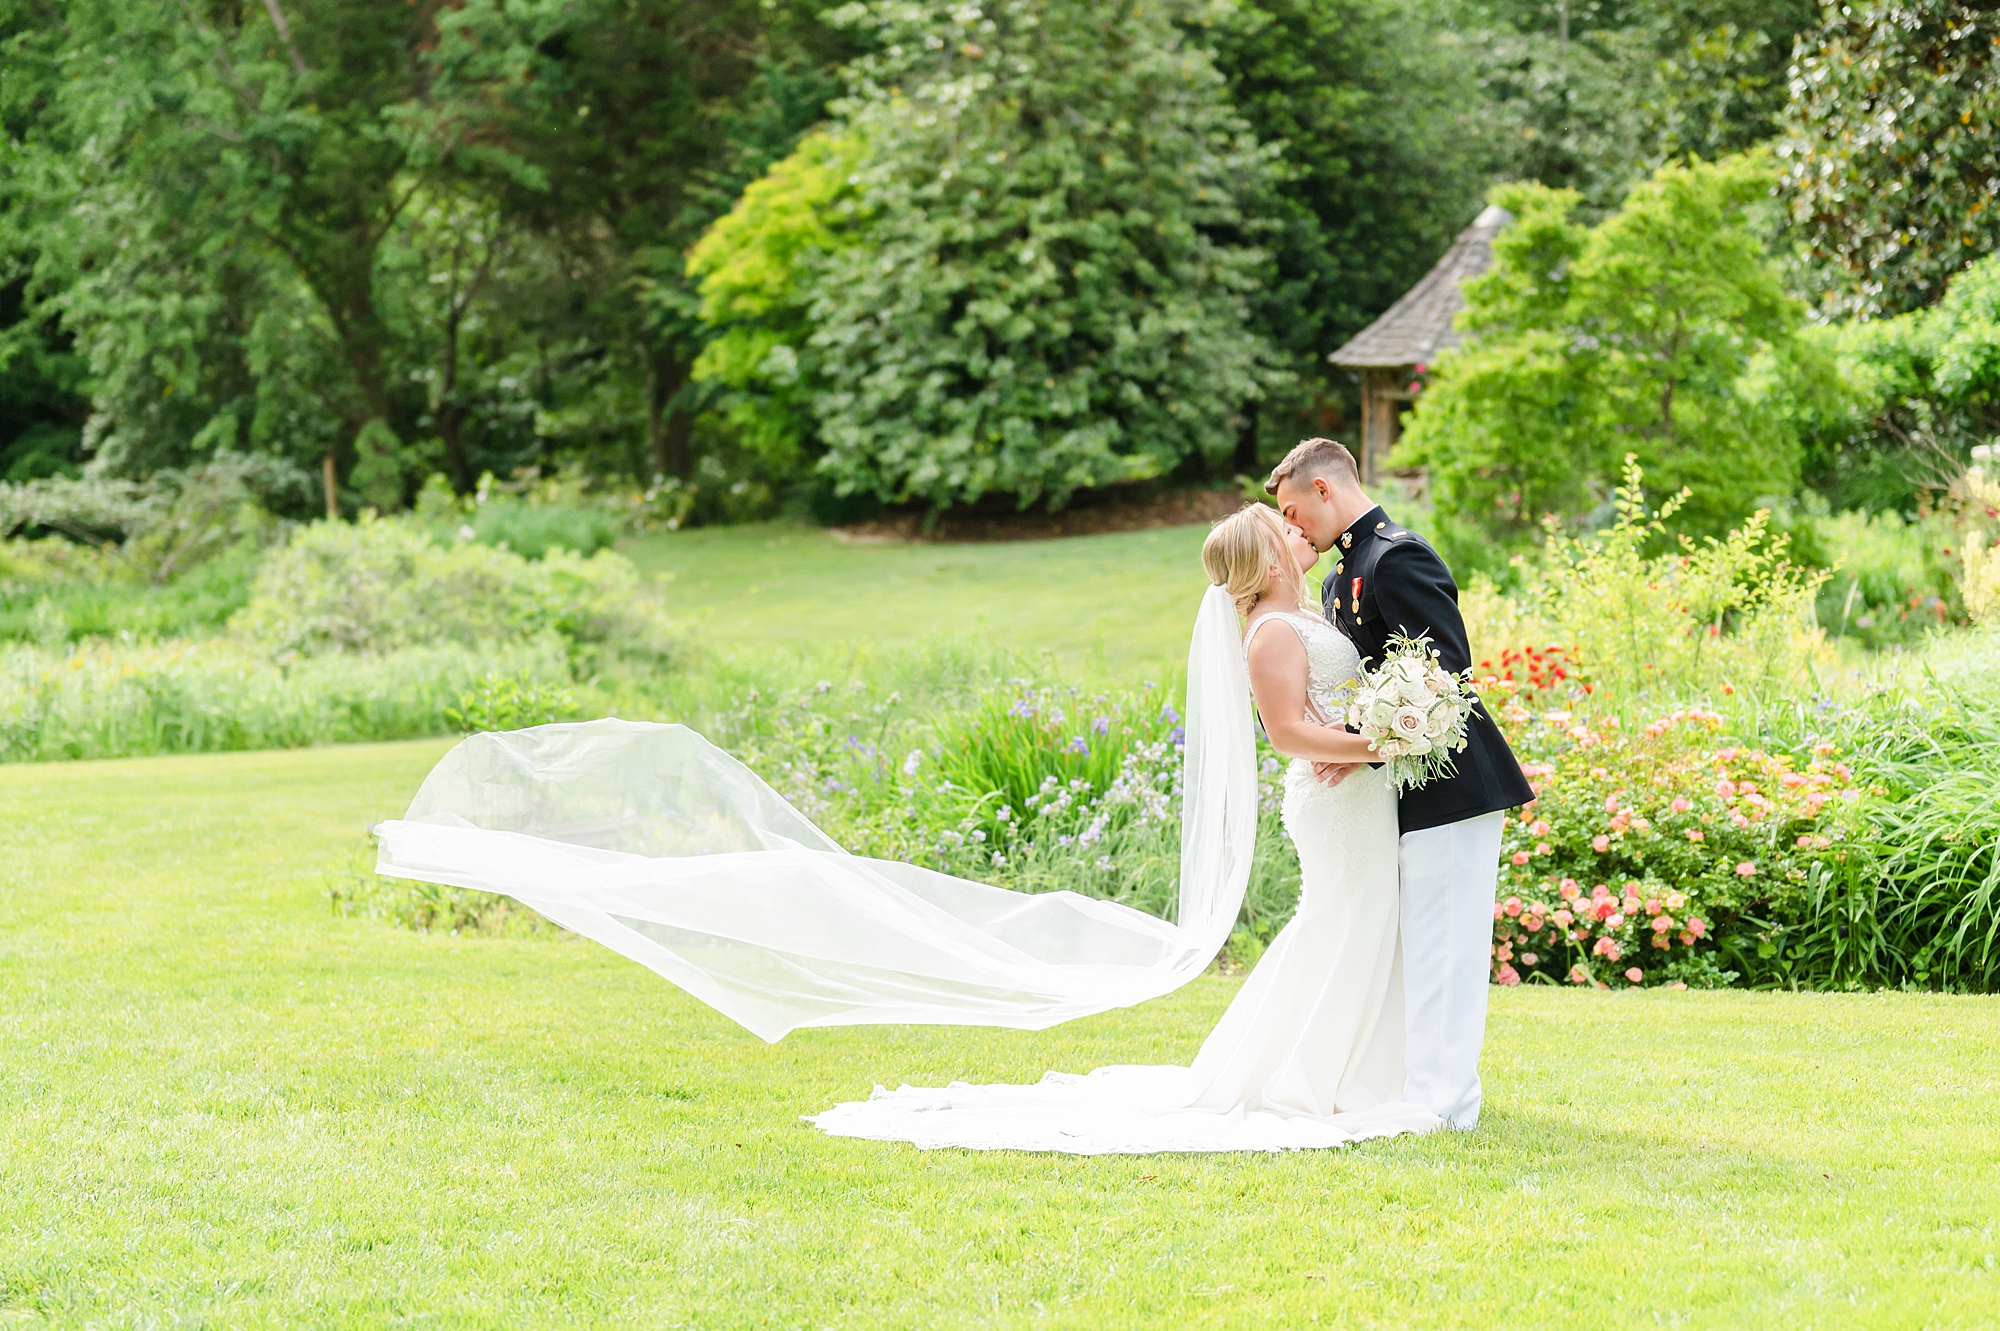 newlyweds kiss with bride's veil floating behind them in Londontown Gardens